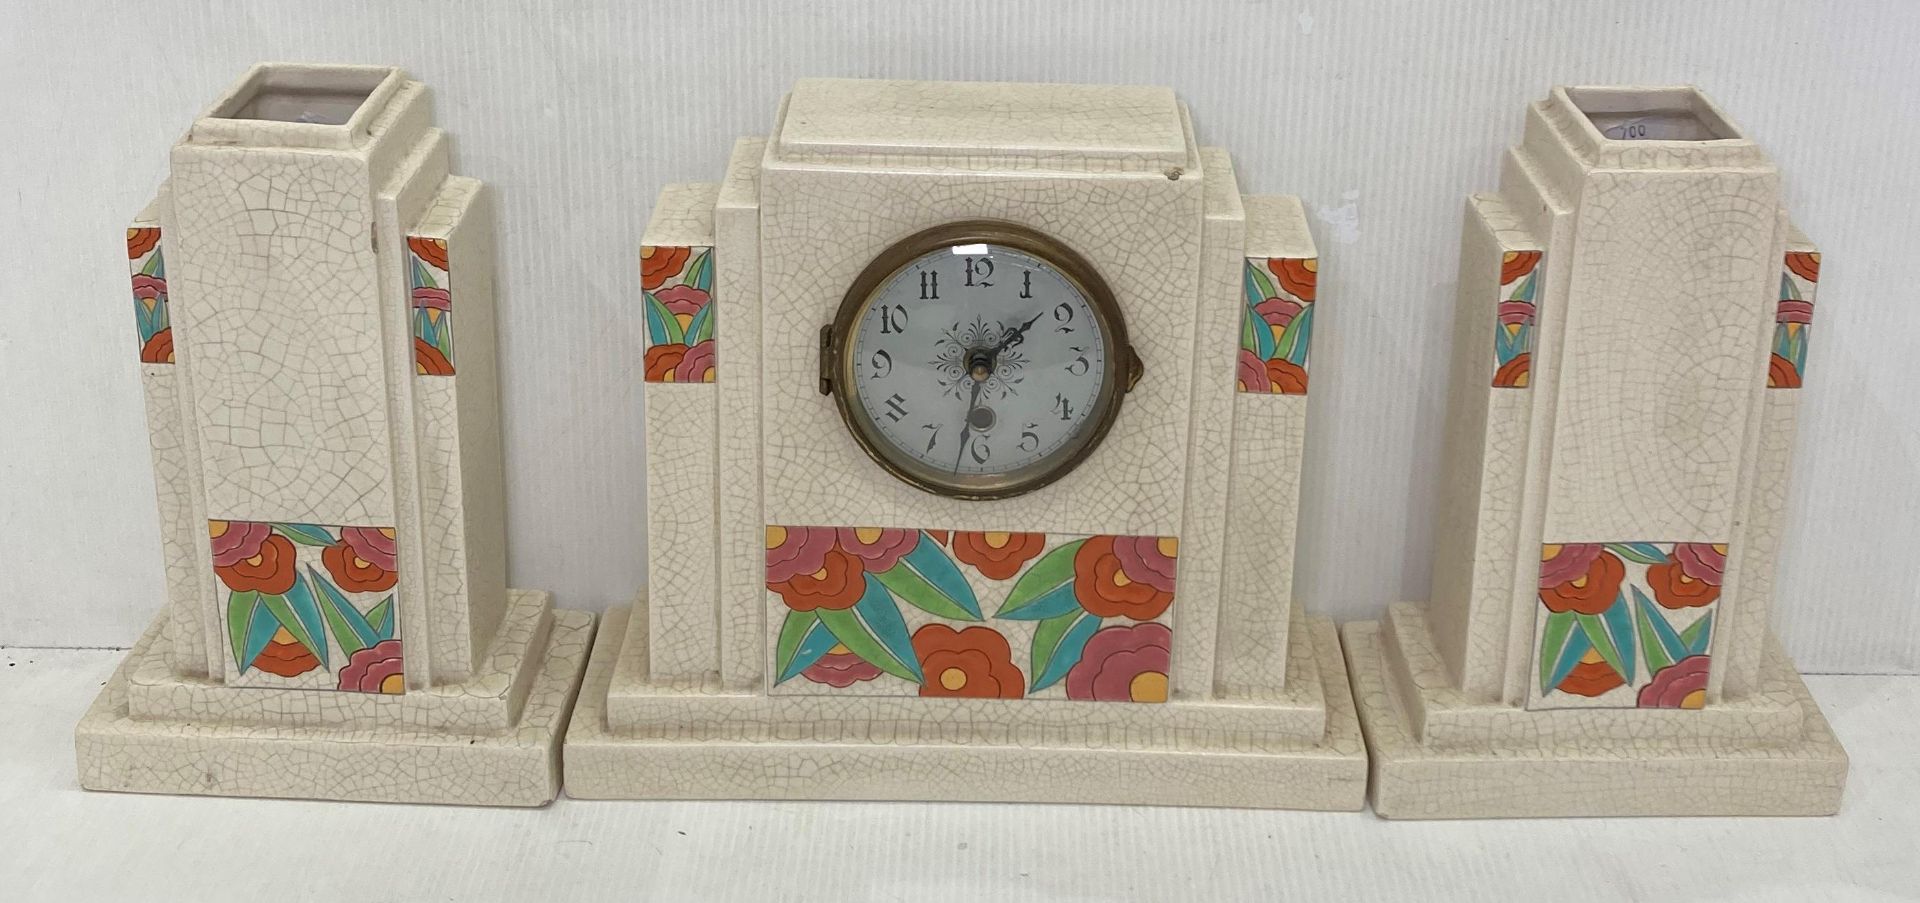 Art Deco 'Orchies' ceramic clock with floral design and crackle glaze with matching vases (saleroom